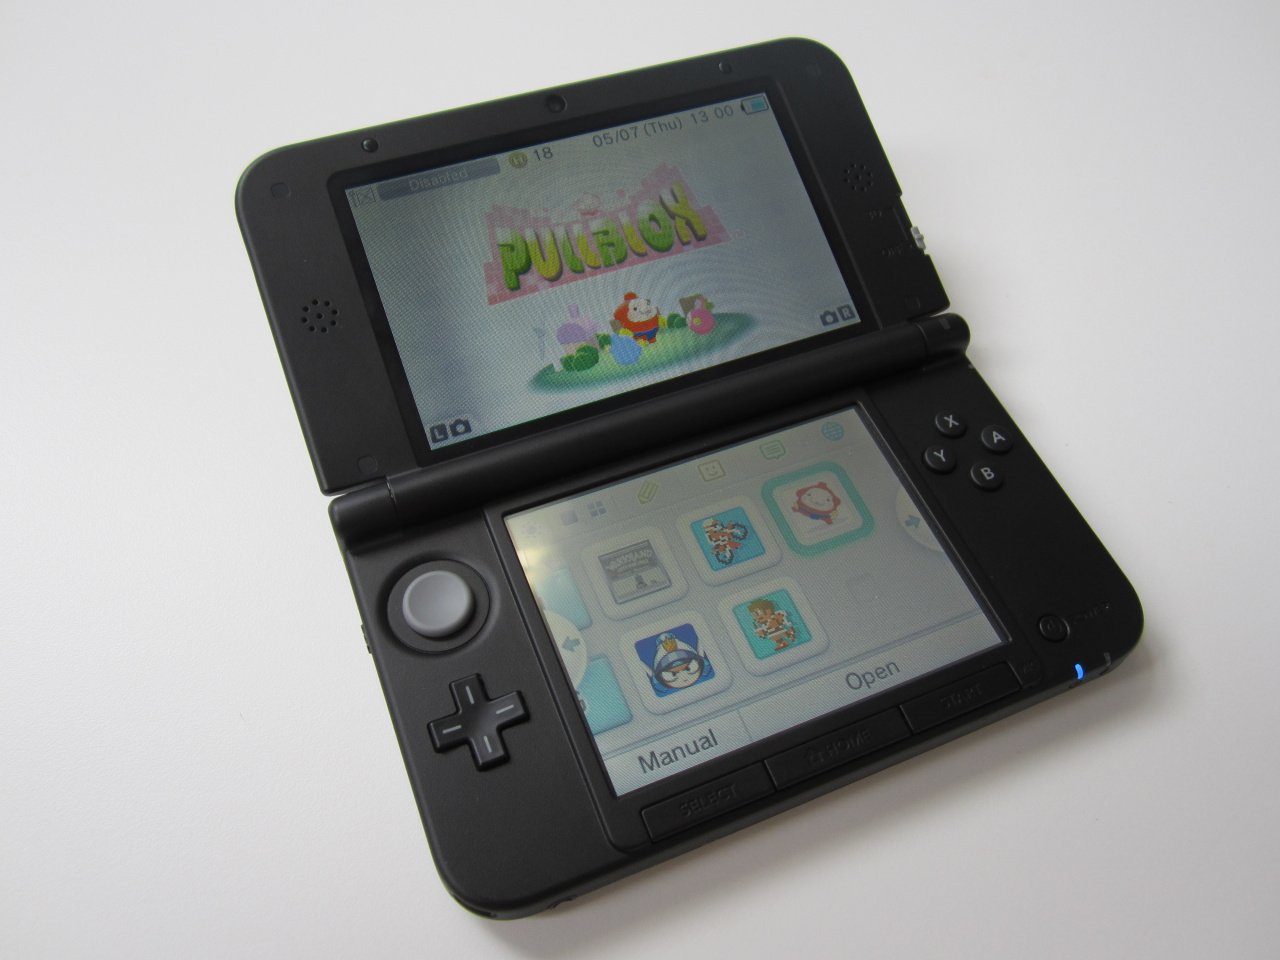 Hardware Review: Nintendo 3DS XL |